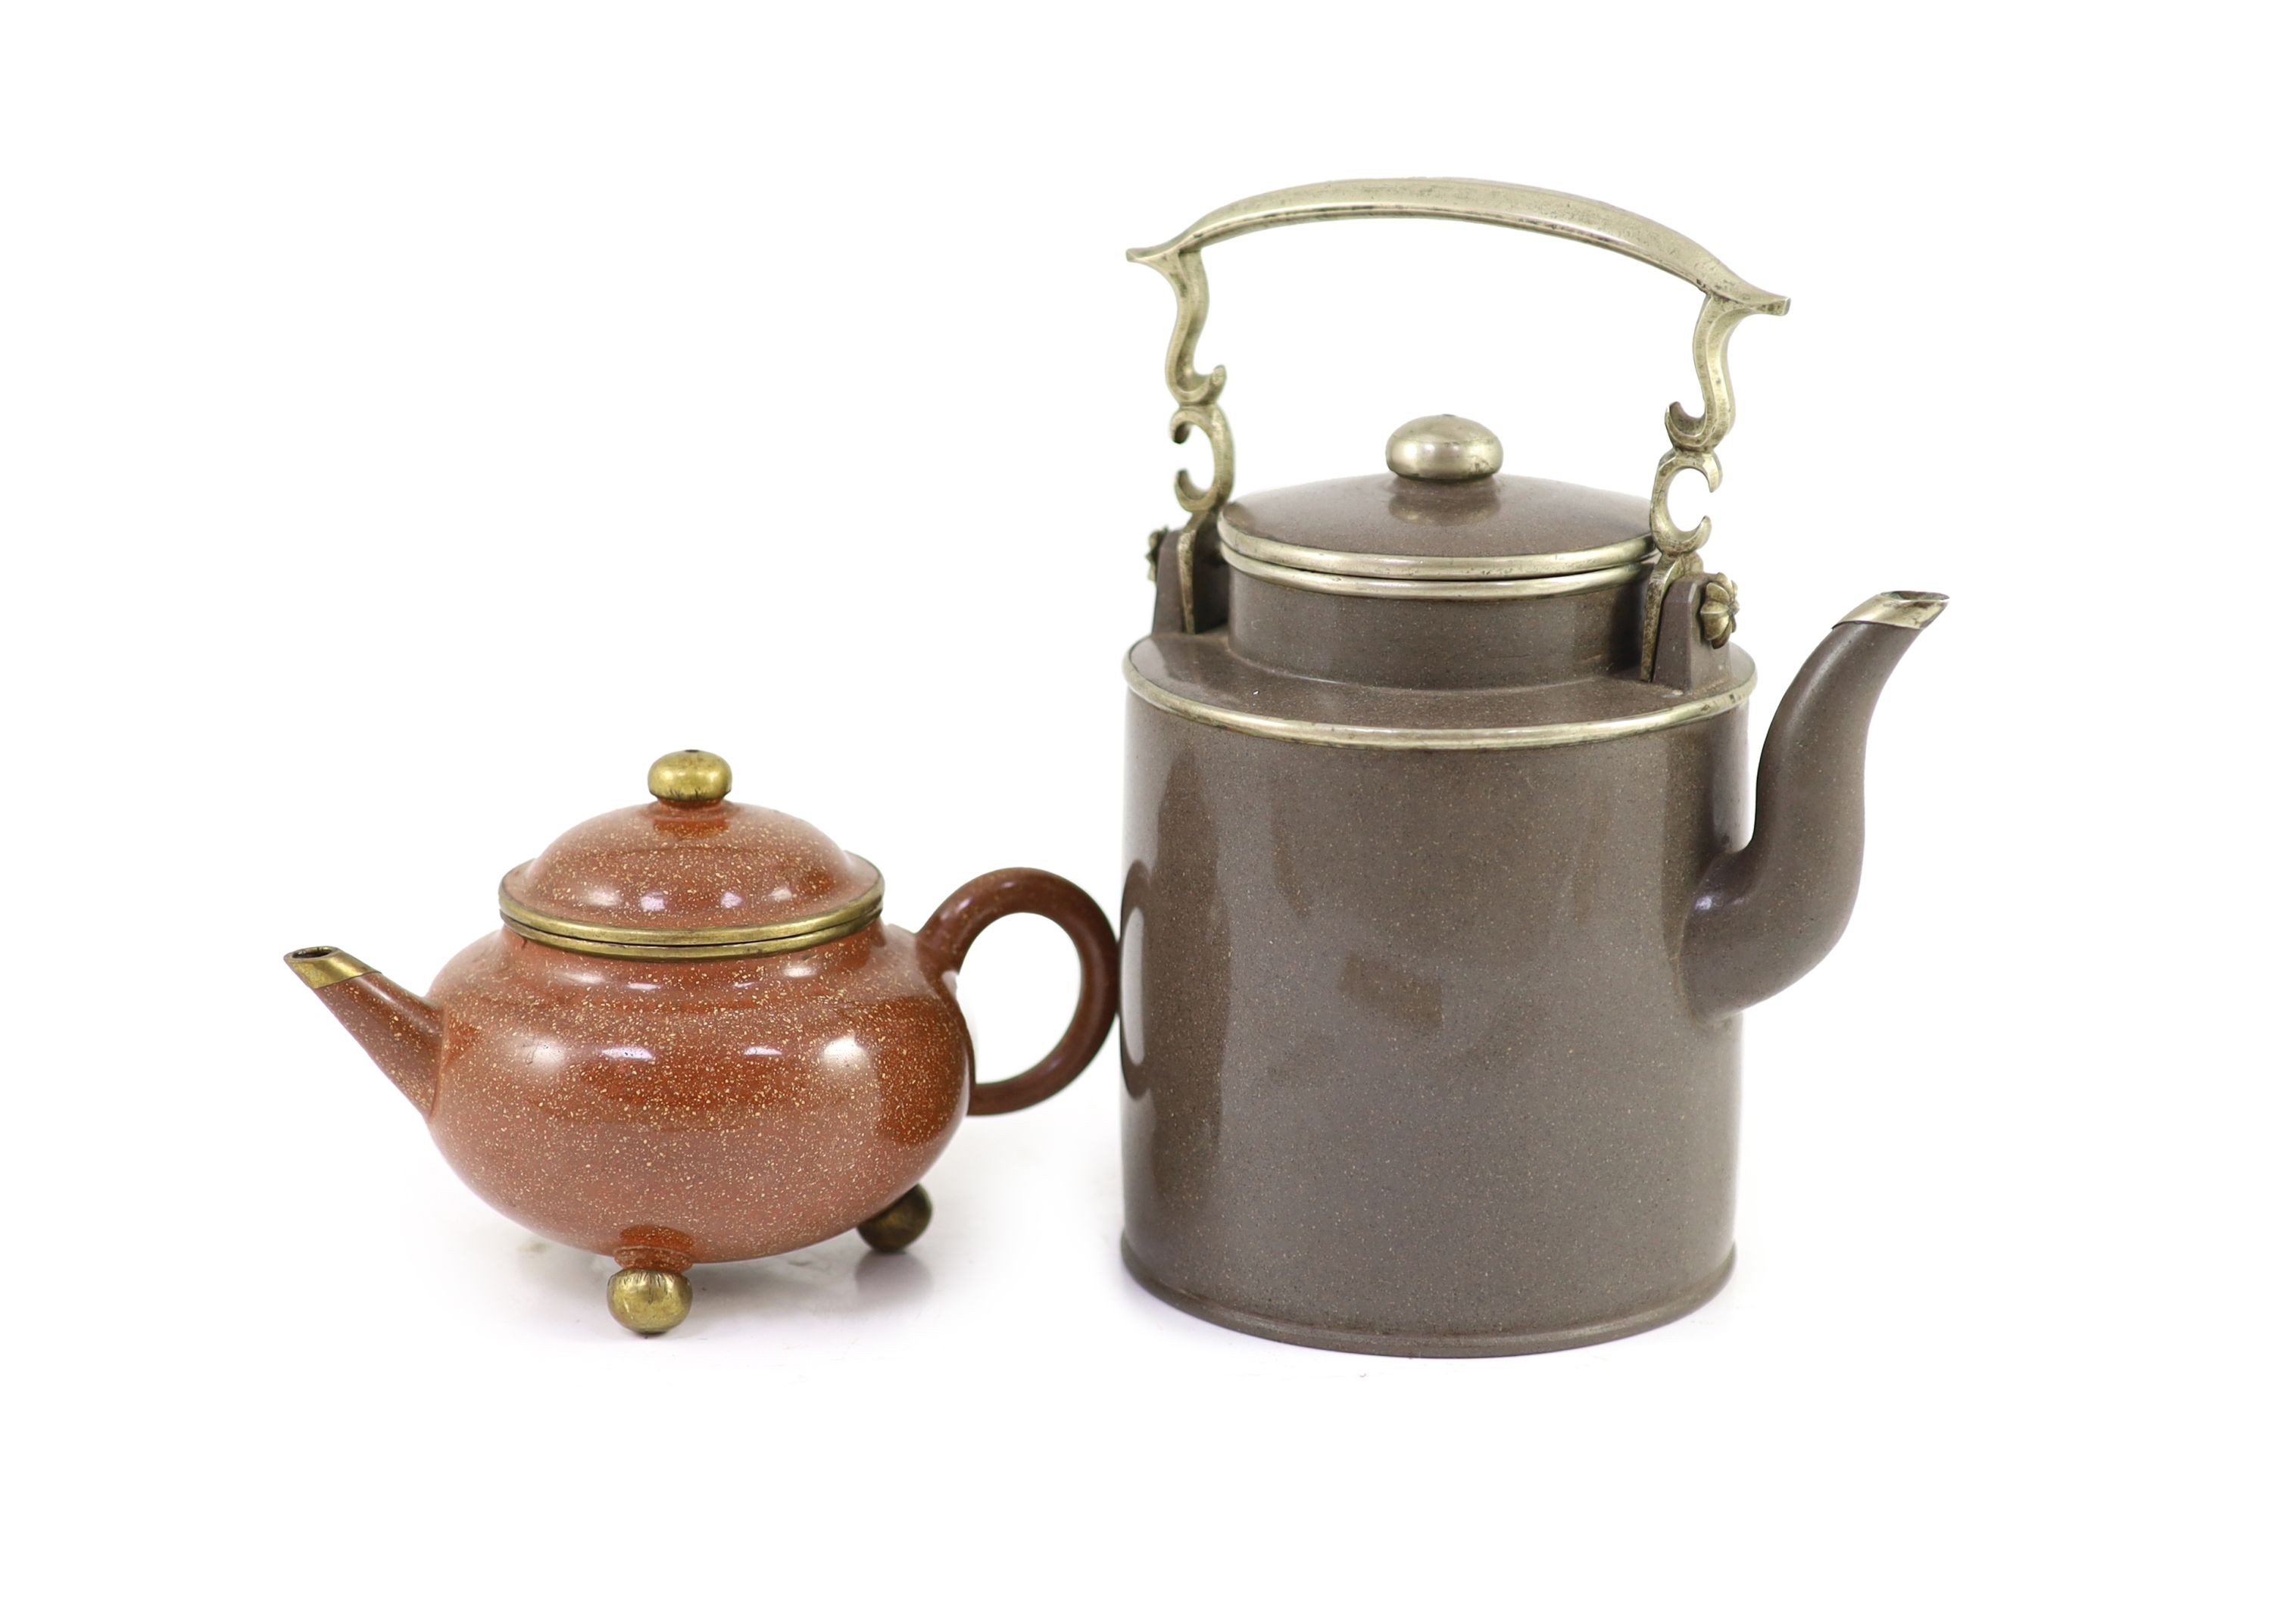 Two Yixing polished teapots made for the Thai market, late 19th century, 19.5 and 9.5 cm high